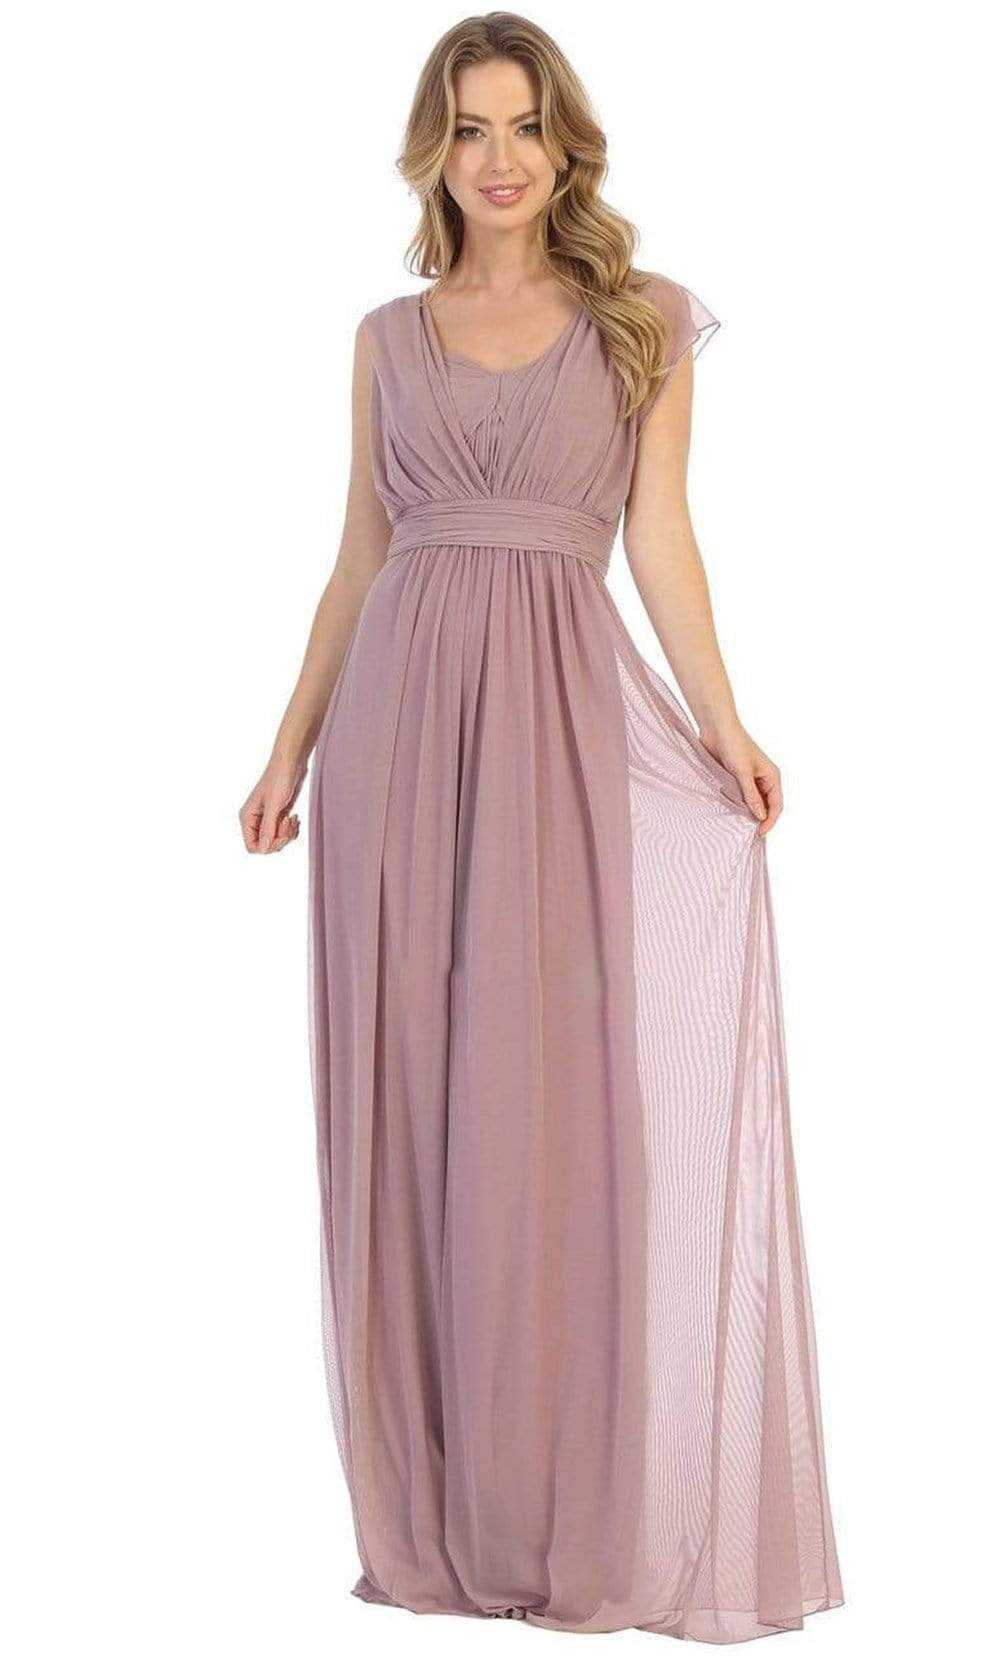 May Queen, May Queen - Ruched Asymmetric Sheath Dress MQ1746 - 1 pc Mauve In Size 18 Available